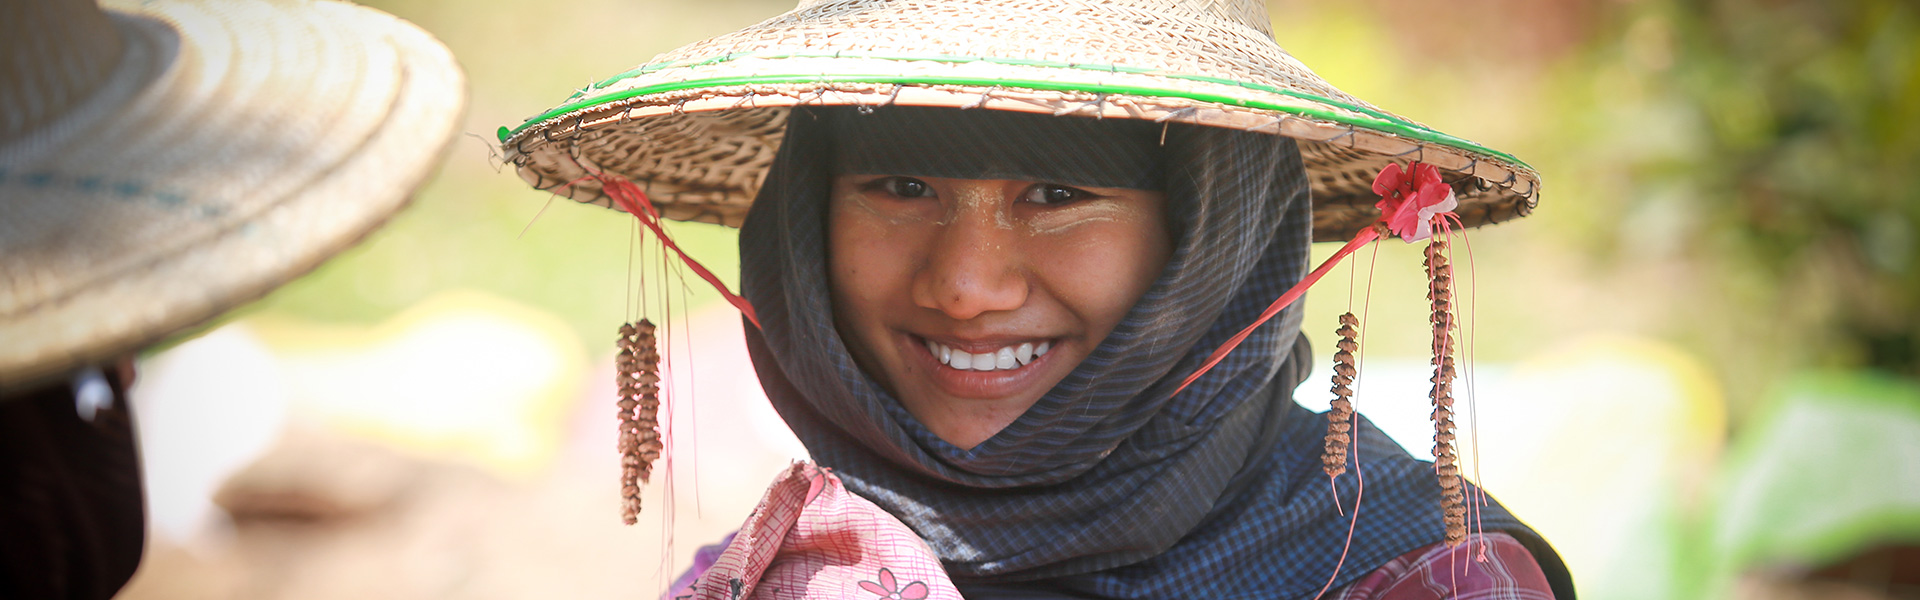 myanmar-smiling-woman-with-hat